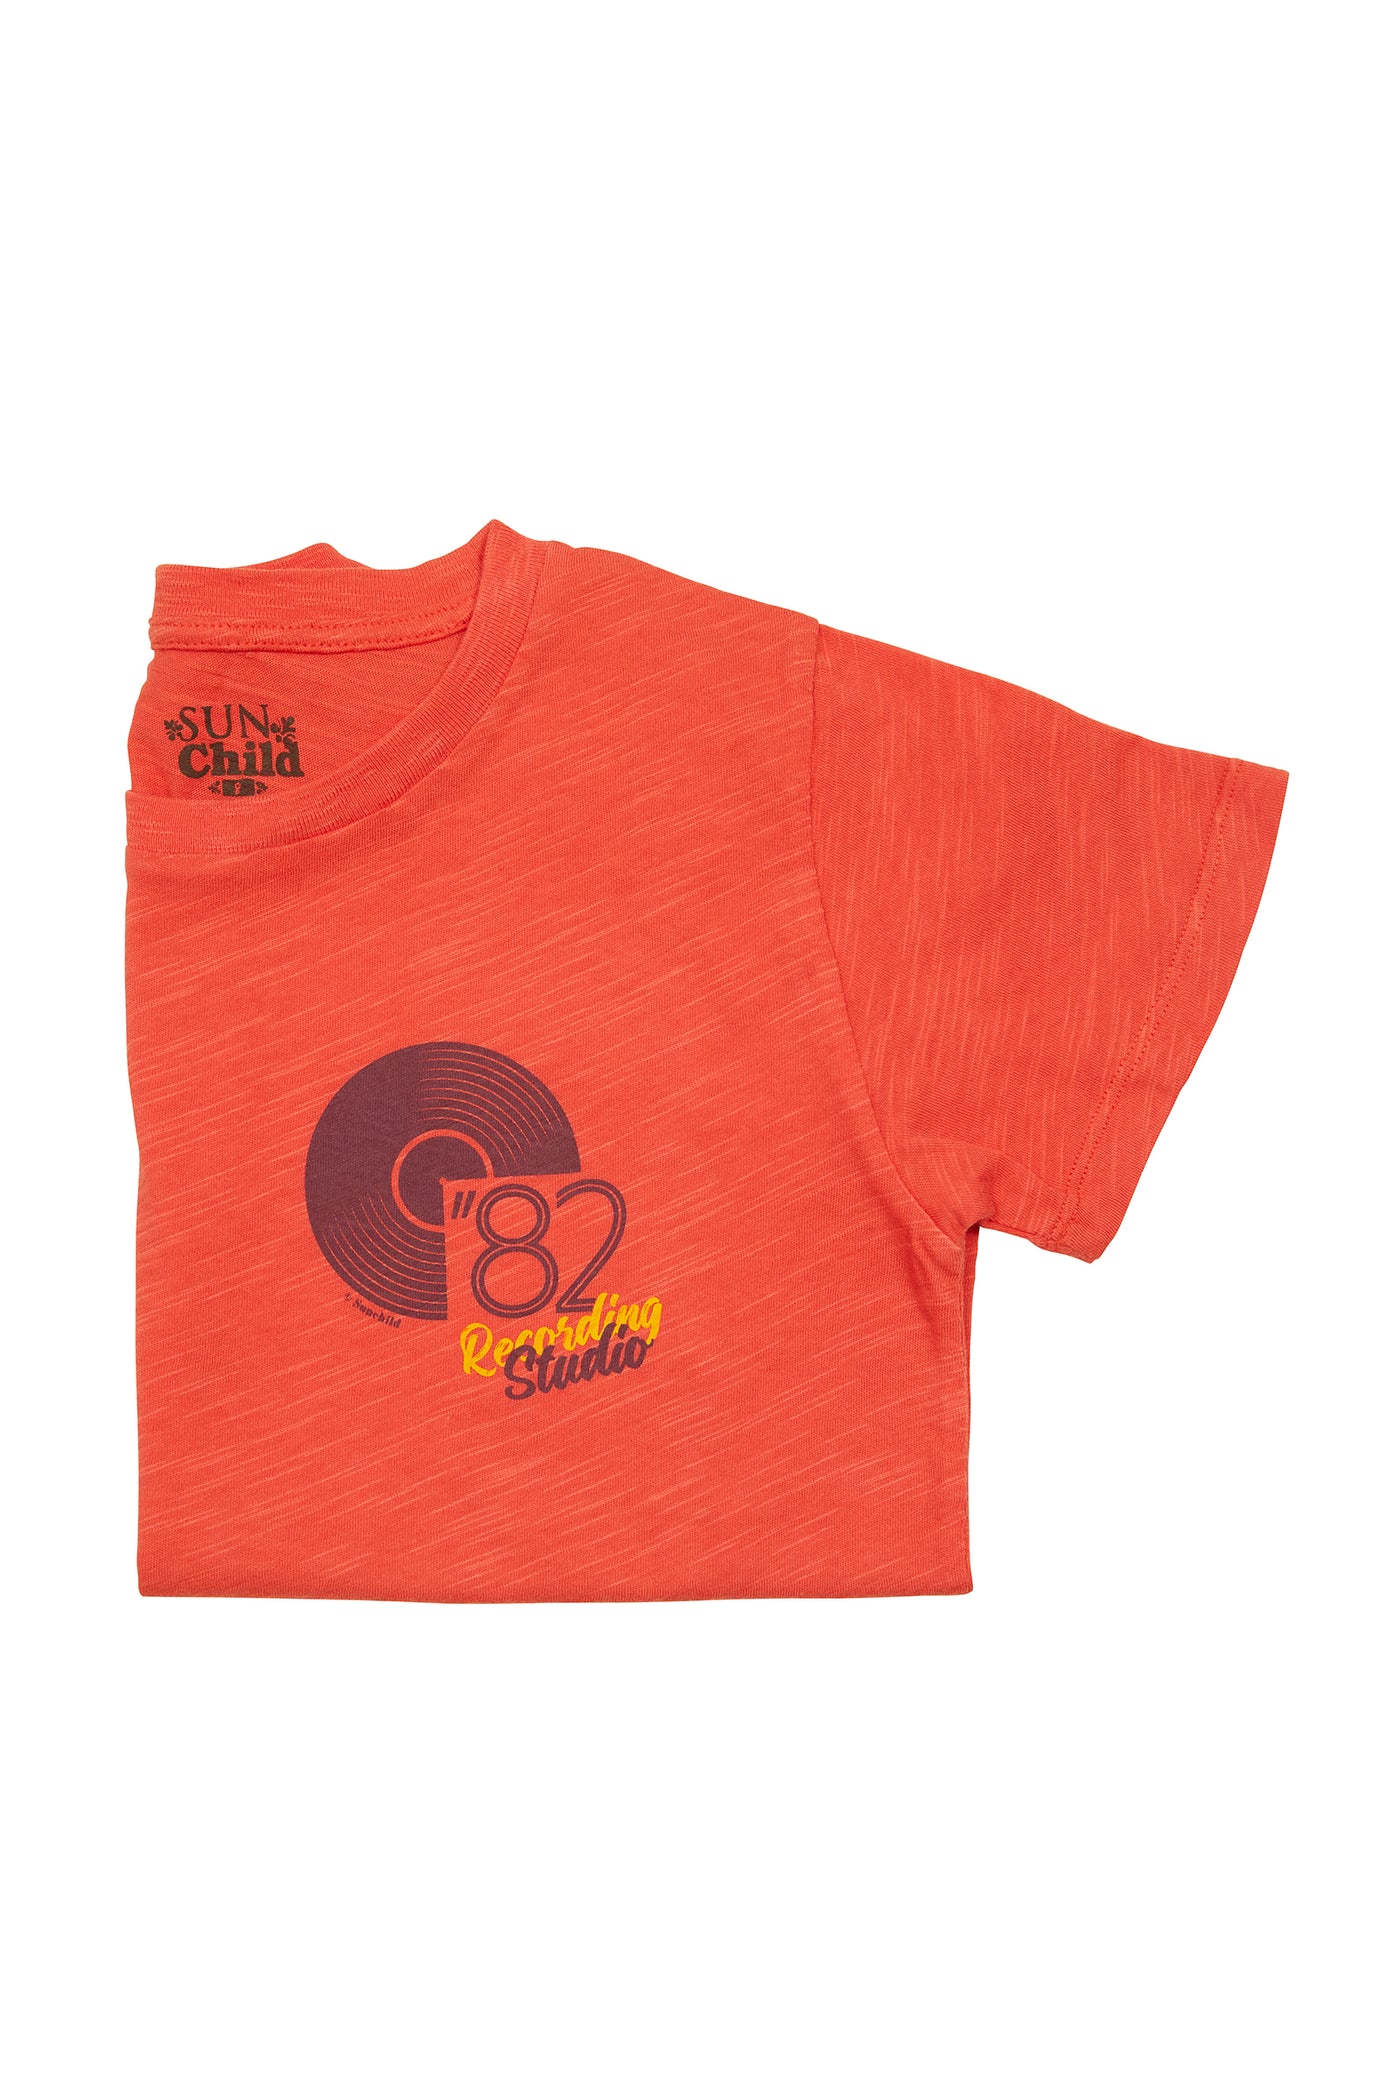 Eighty 2 Tee Shirt | Piment Red